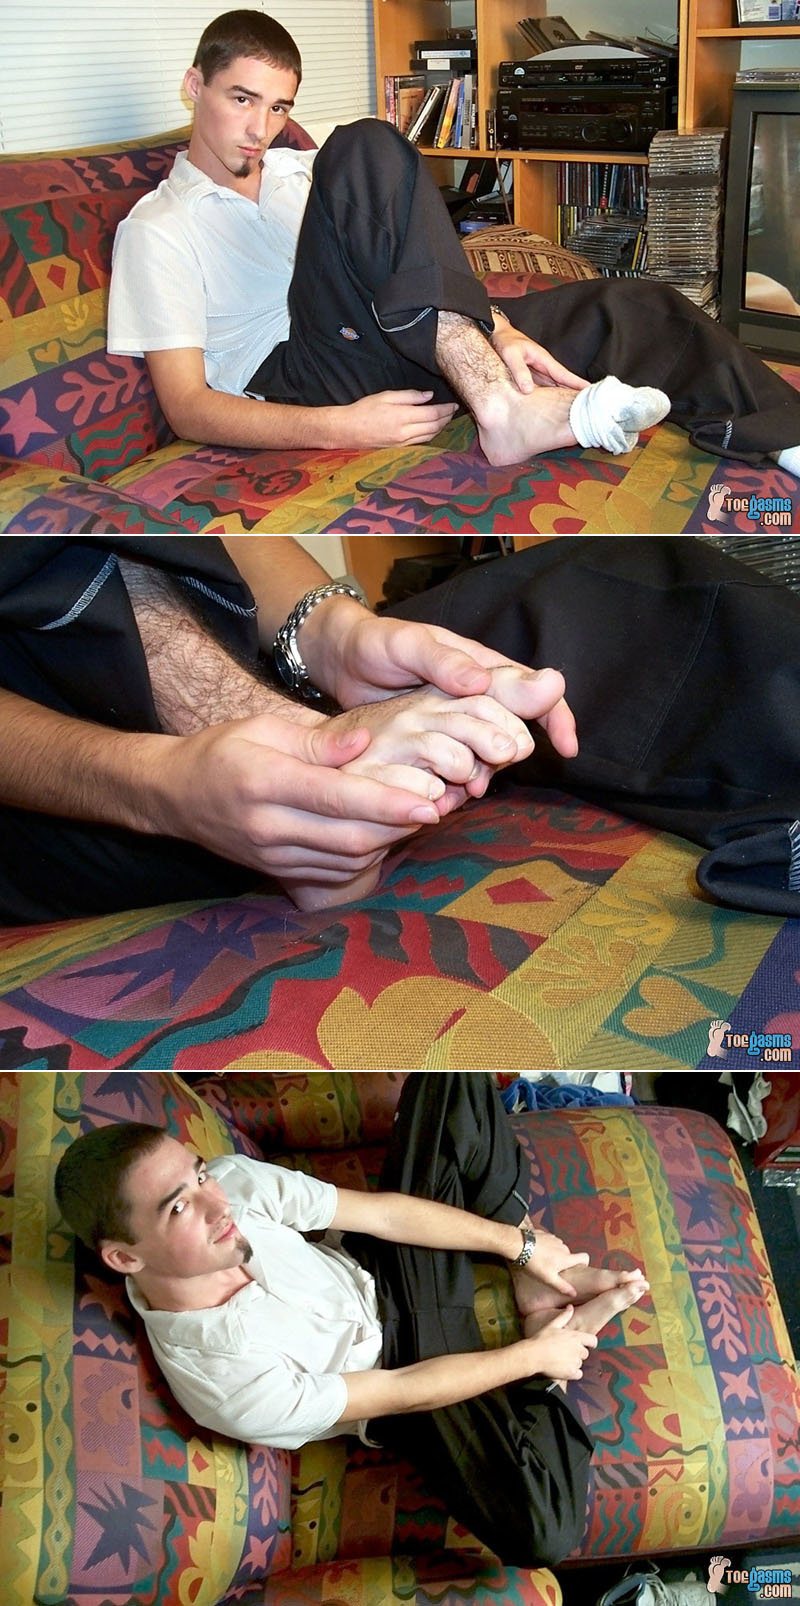 Hairy calves and smooth bare feet